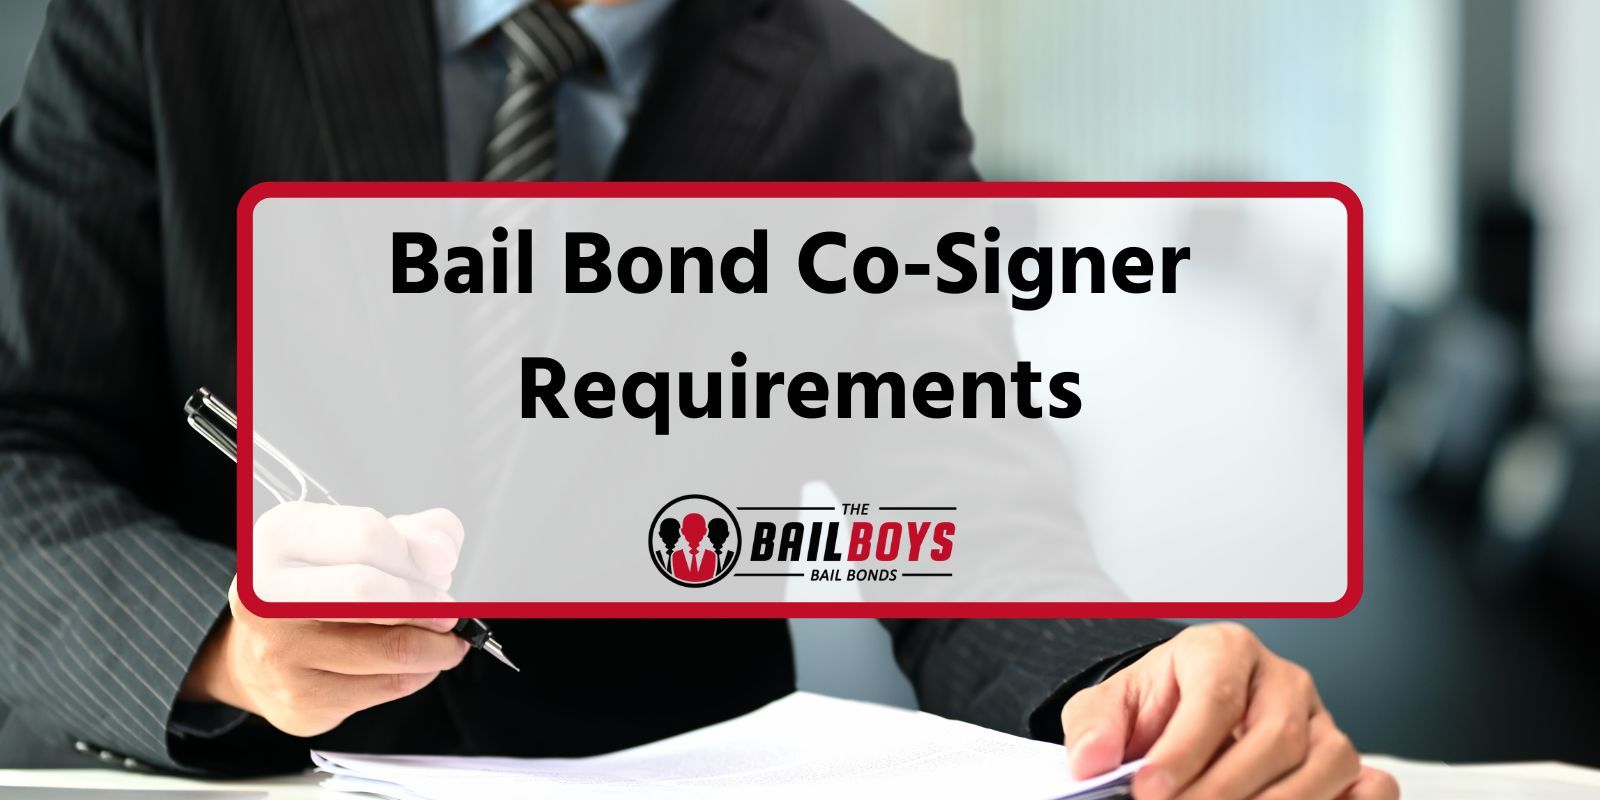 Bail Bond Co-Signer Requirements